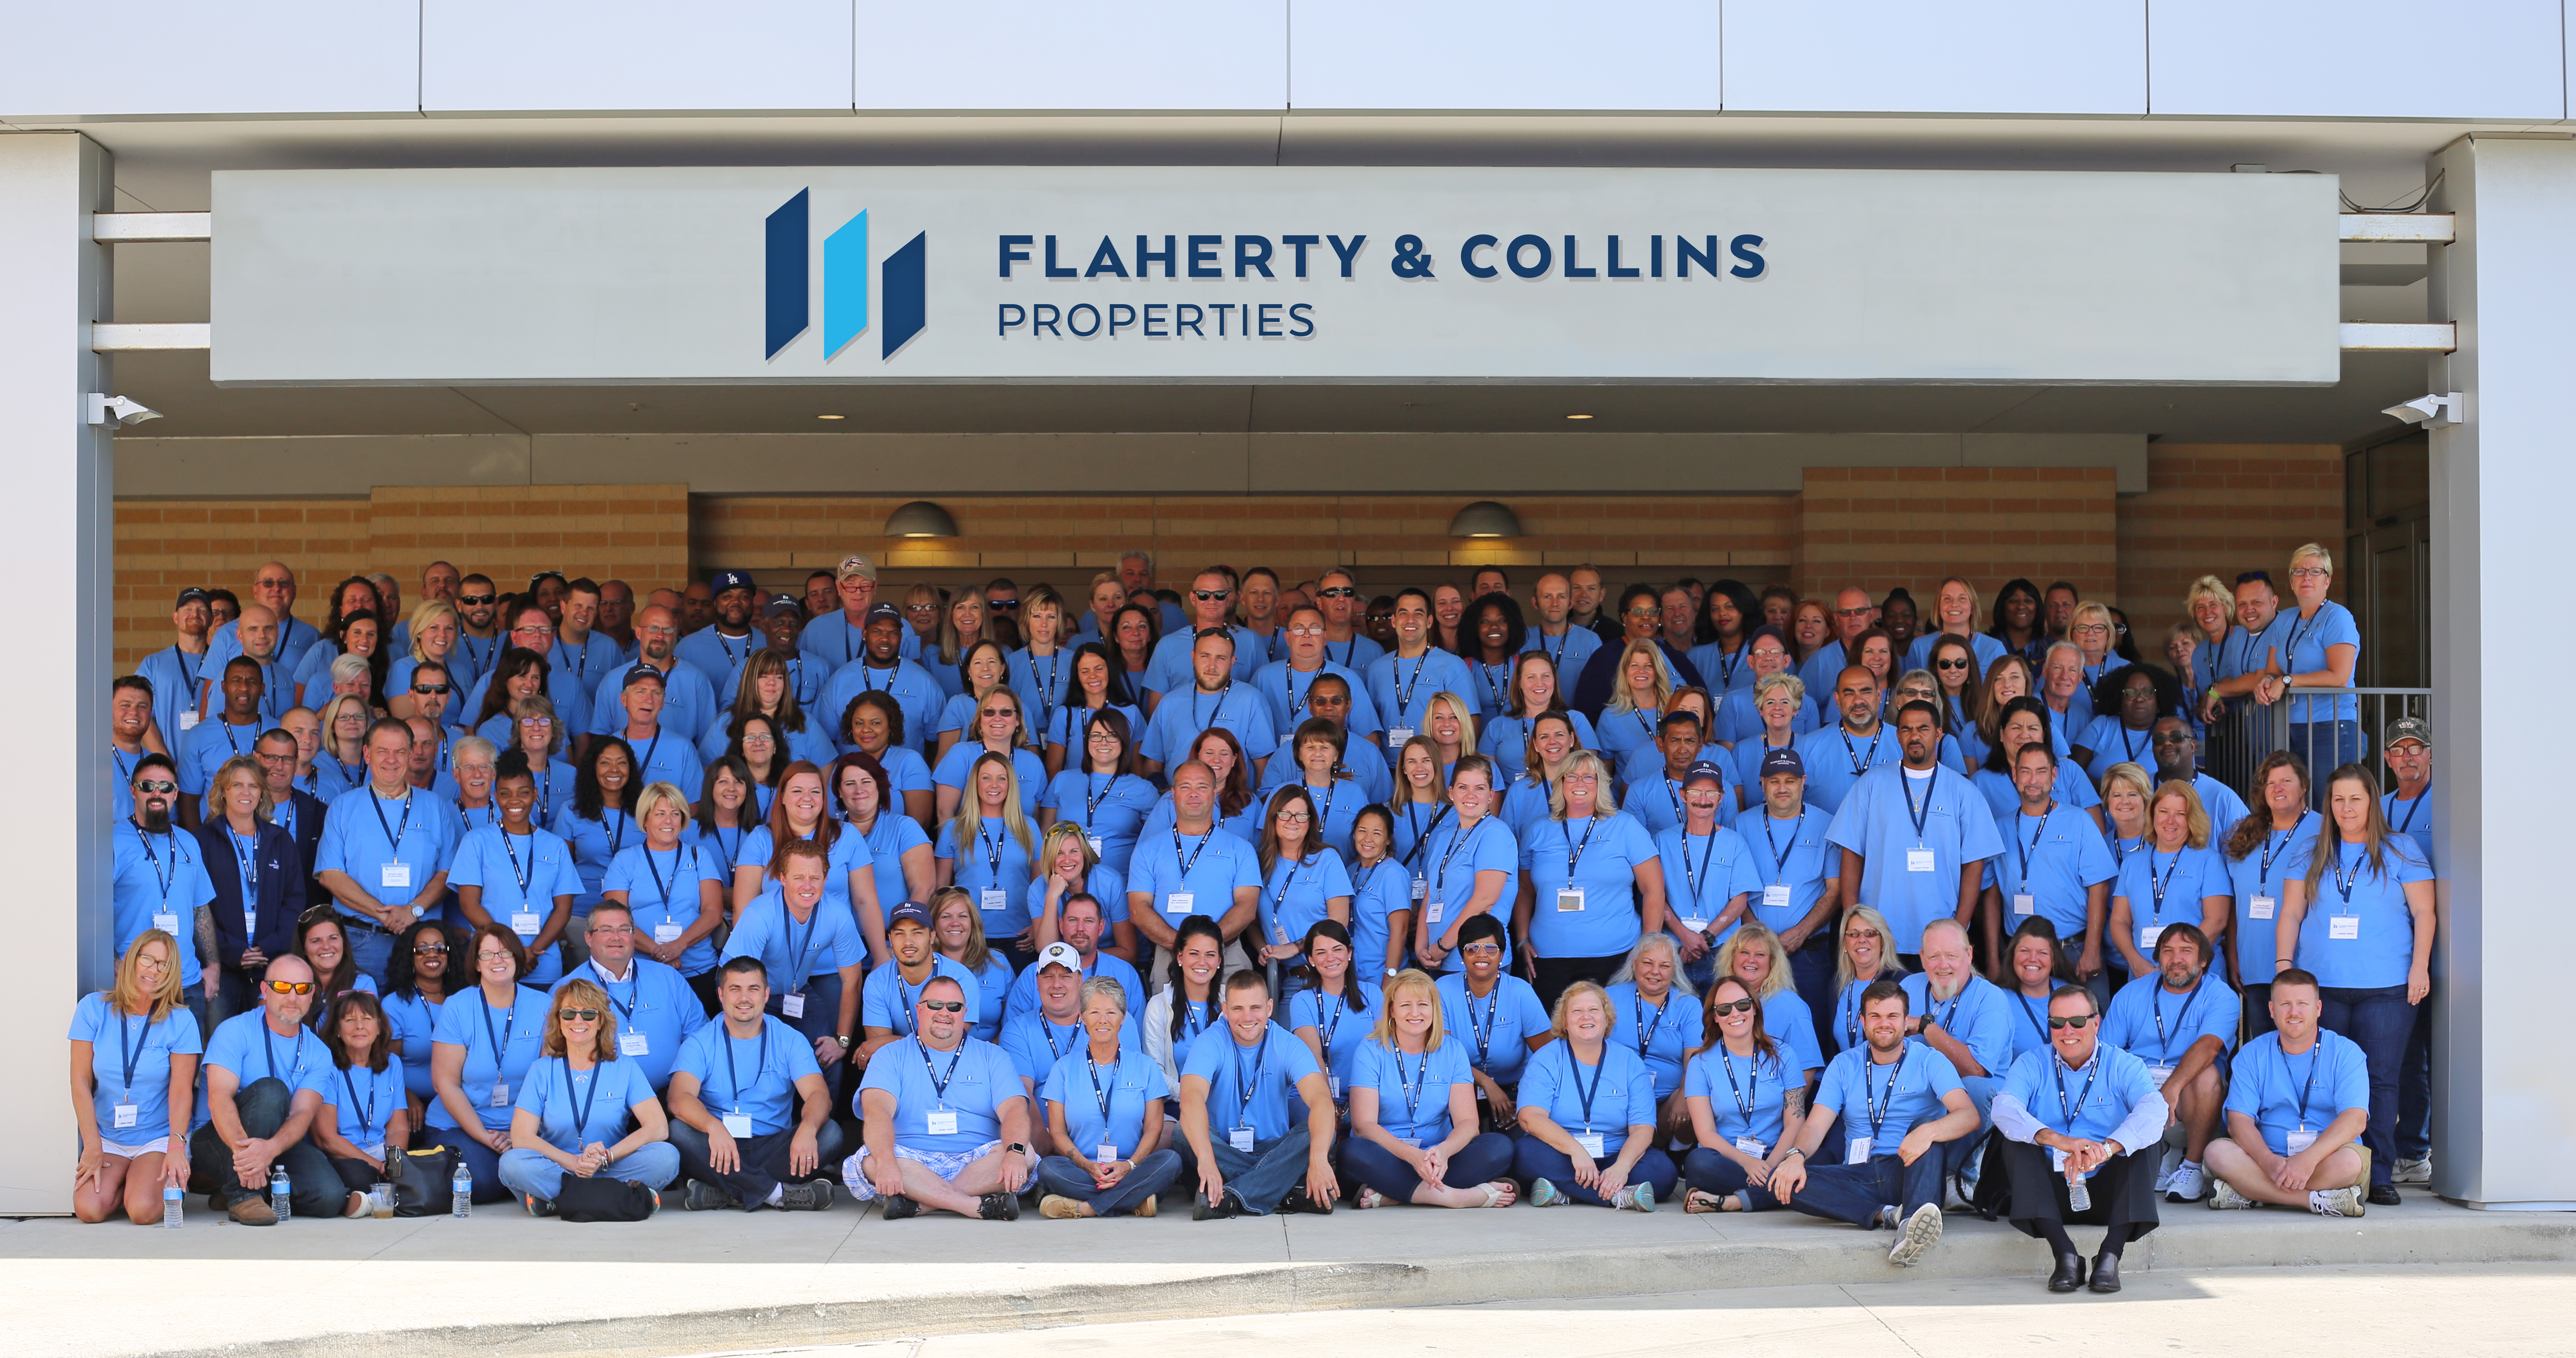 flaherty-collins-group-photo